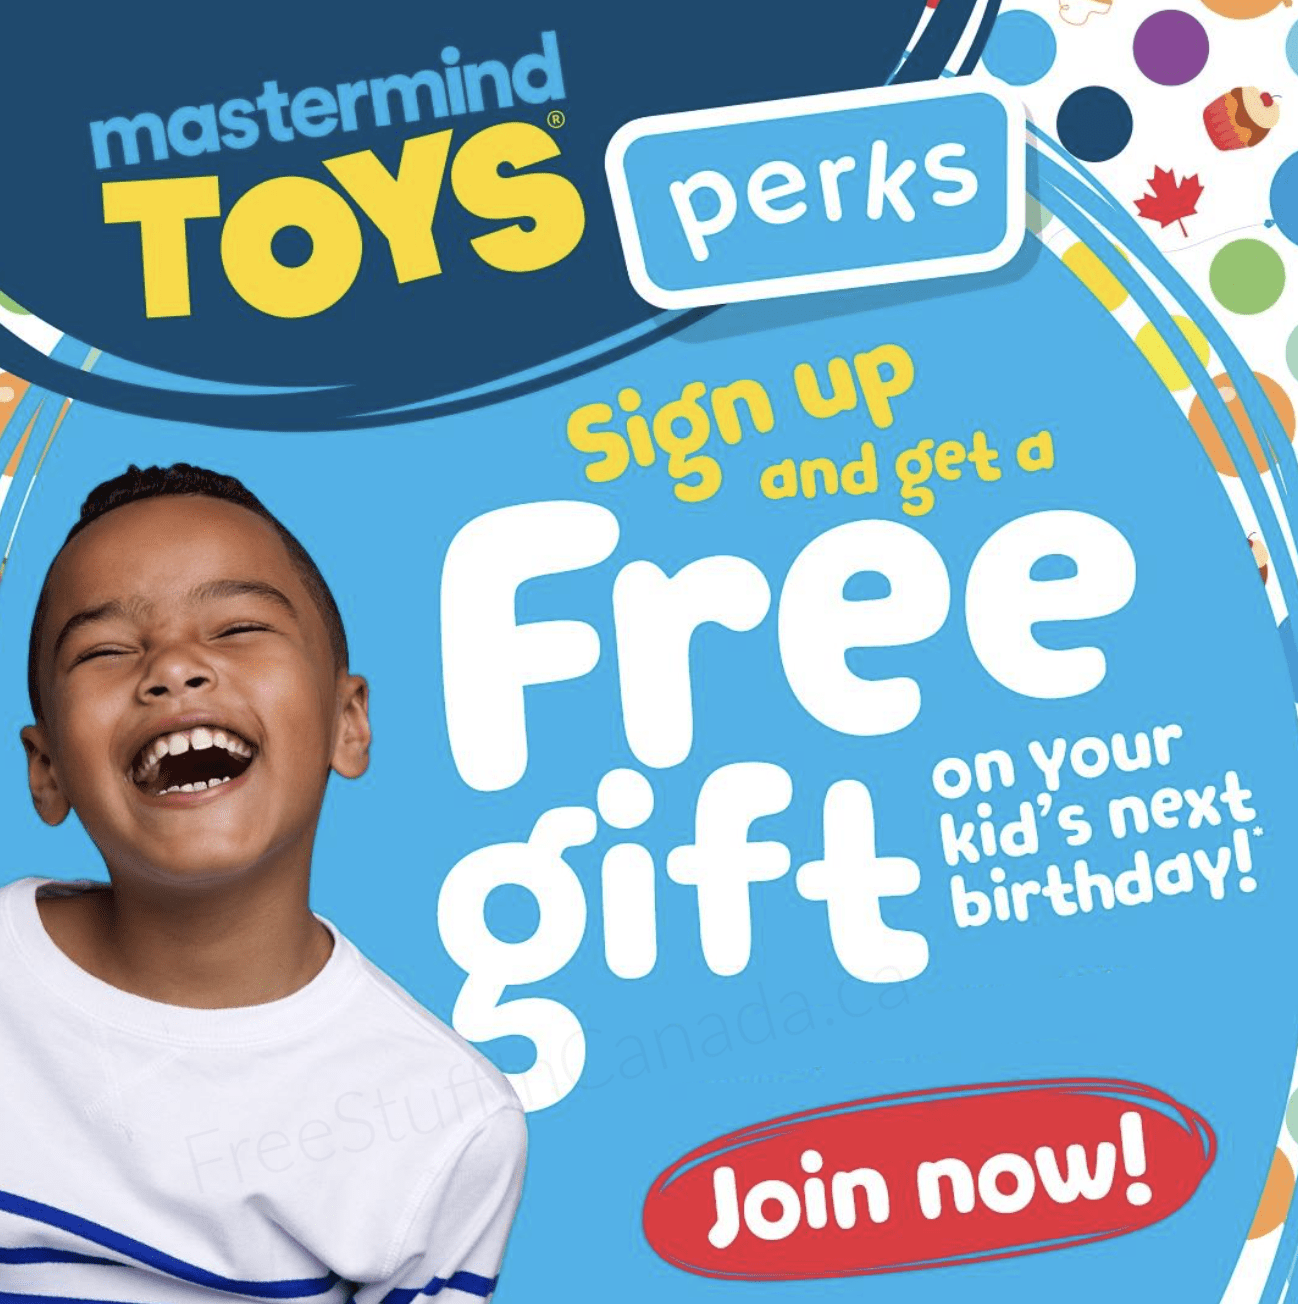 Free Toy For Kids on Their Birthday! Free Stuff in Canada